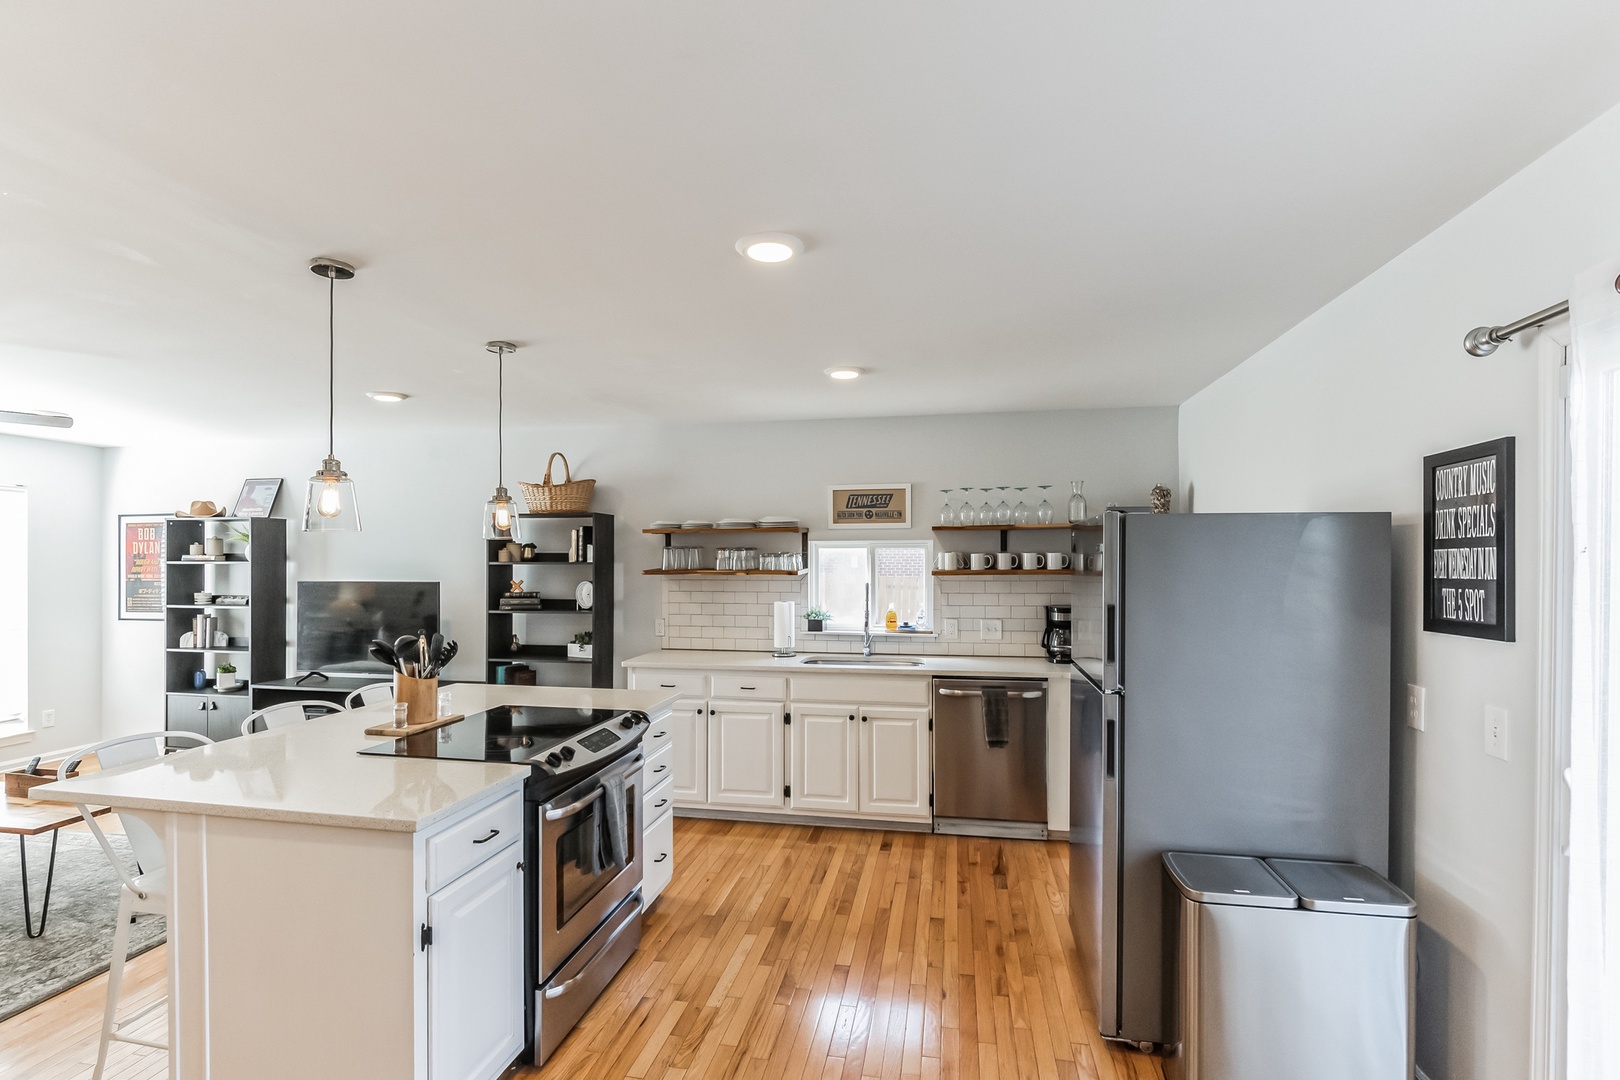 This open kitchen offers ample space & all the comforts of home